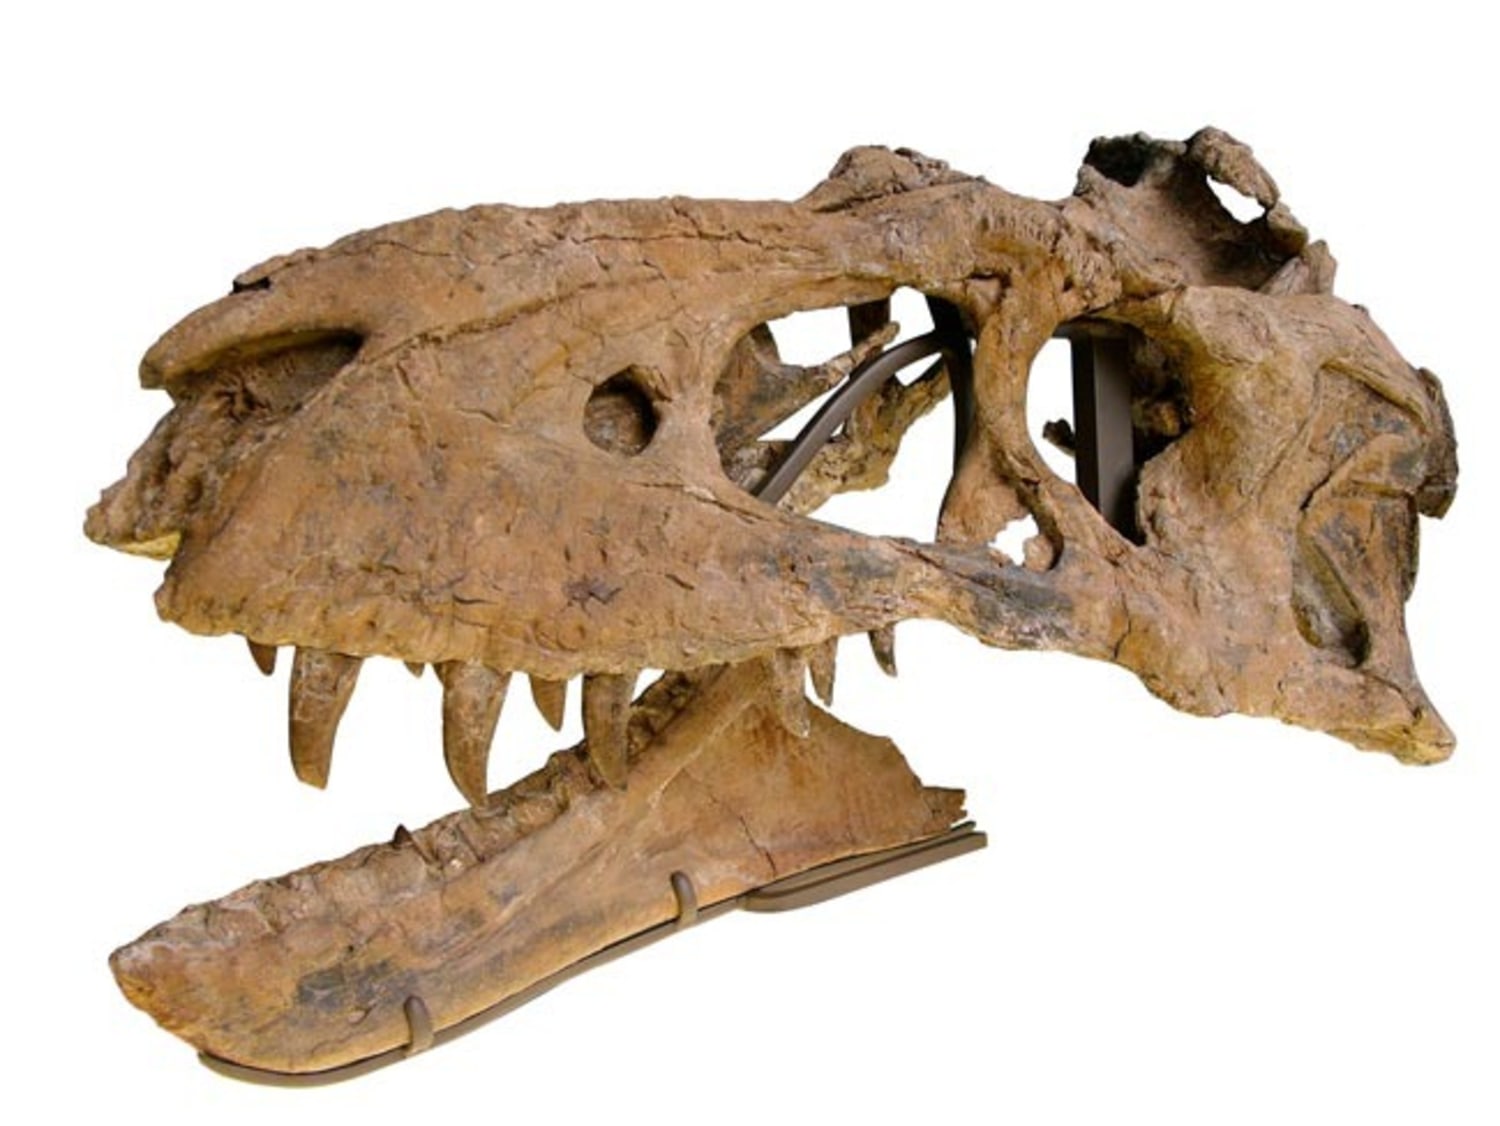 Closest relative of Tyrannosaurus rex discovered in New Mexico